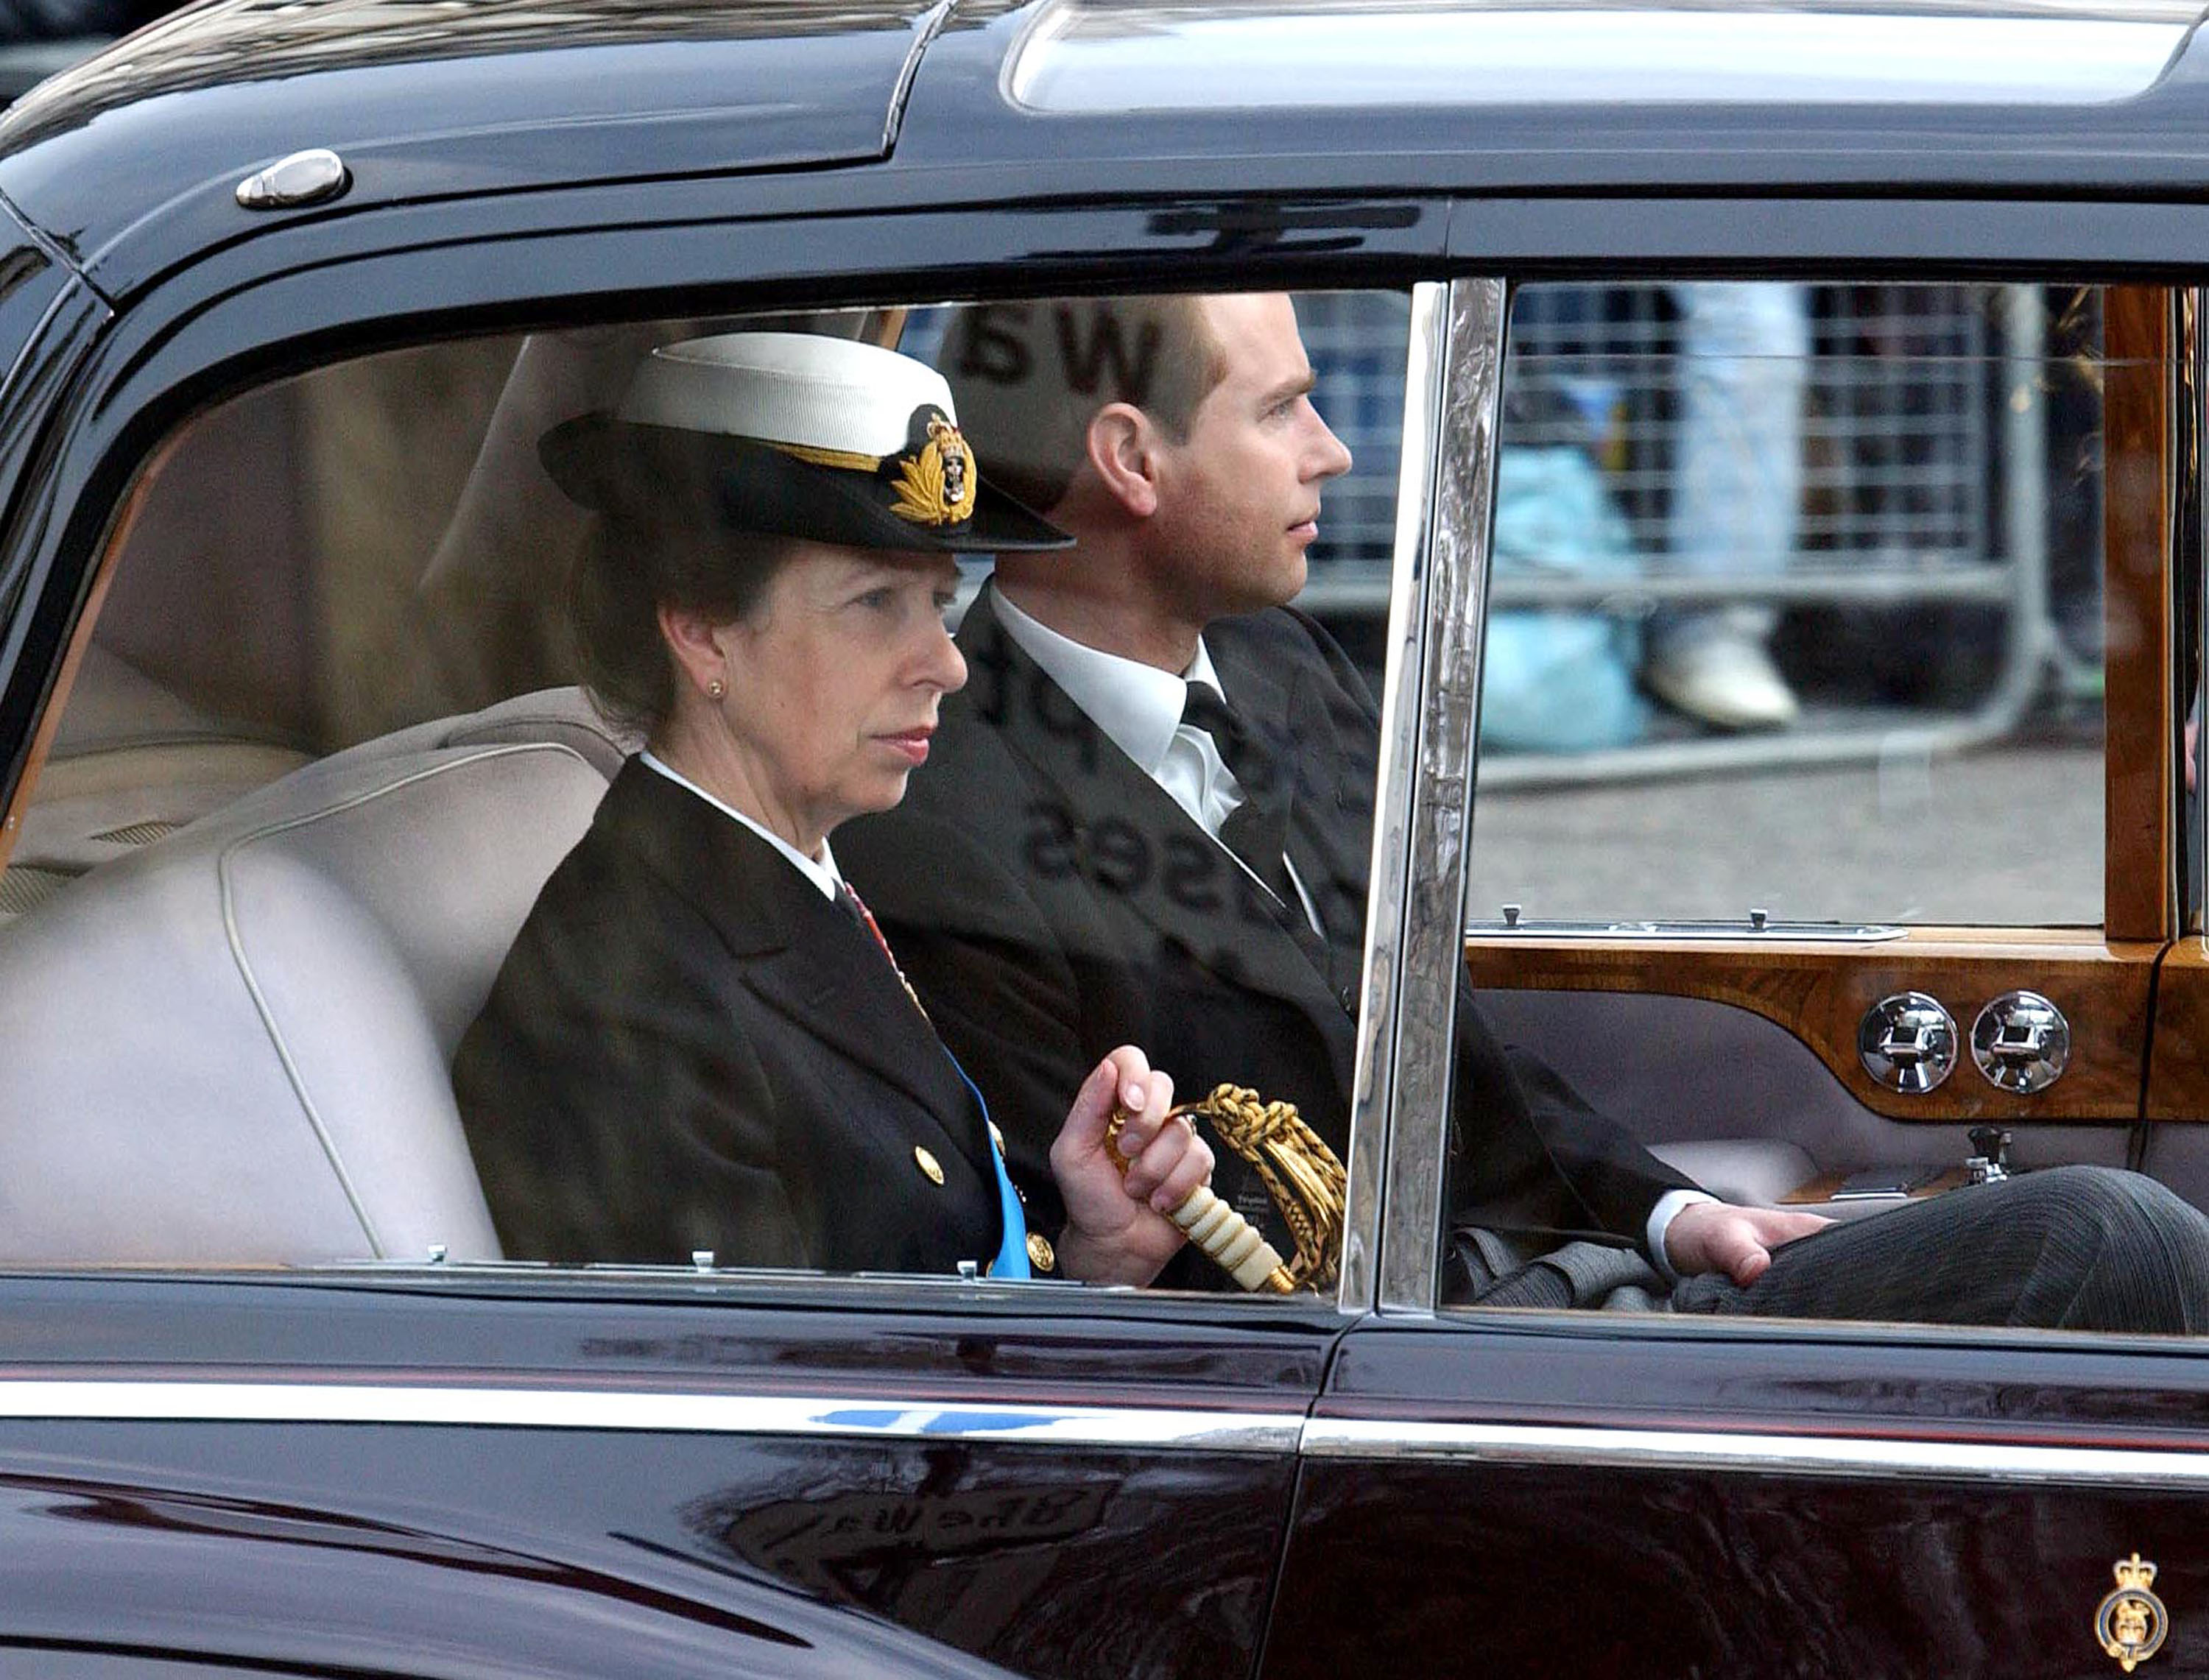 Princess Anne spotted inside the Royal car on the streets of UK. | Source: Getty Images